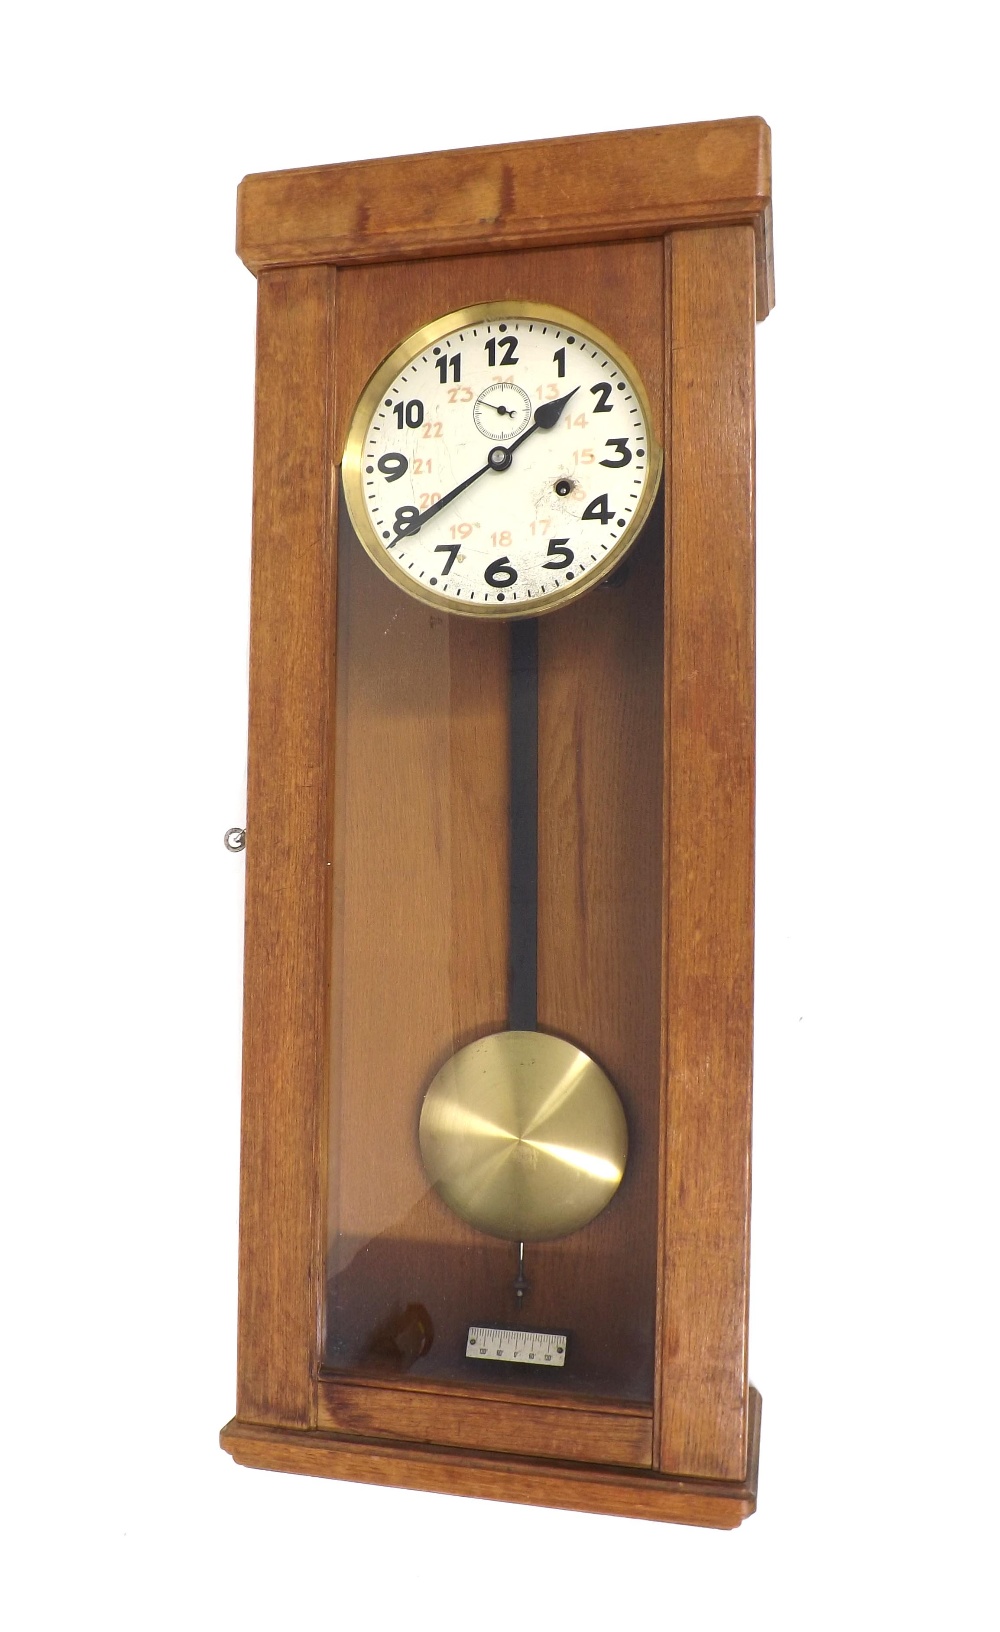 Two C. Theod. Wagner mechanical wall clocks with provision for contacts to operate electrical slaves - Image 4 of 5